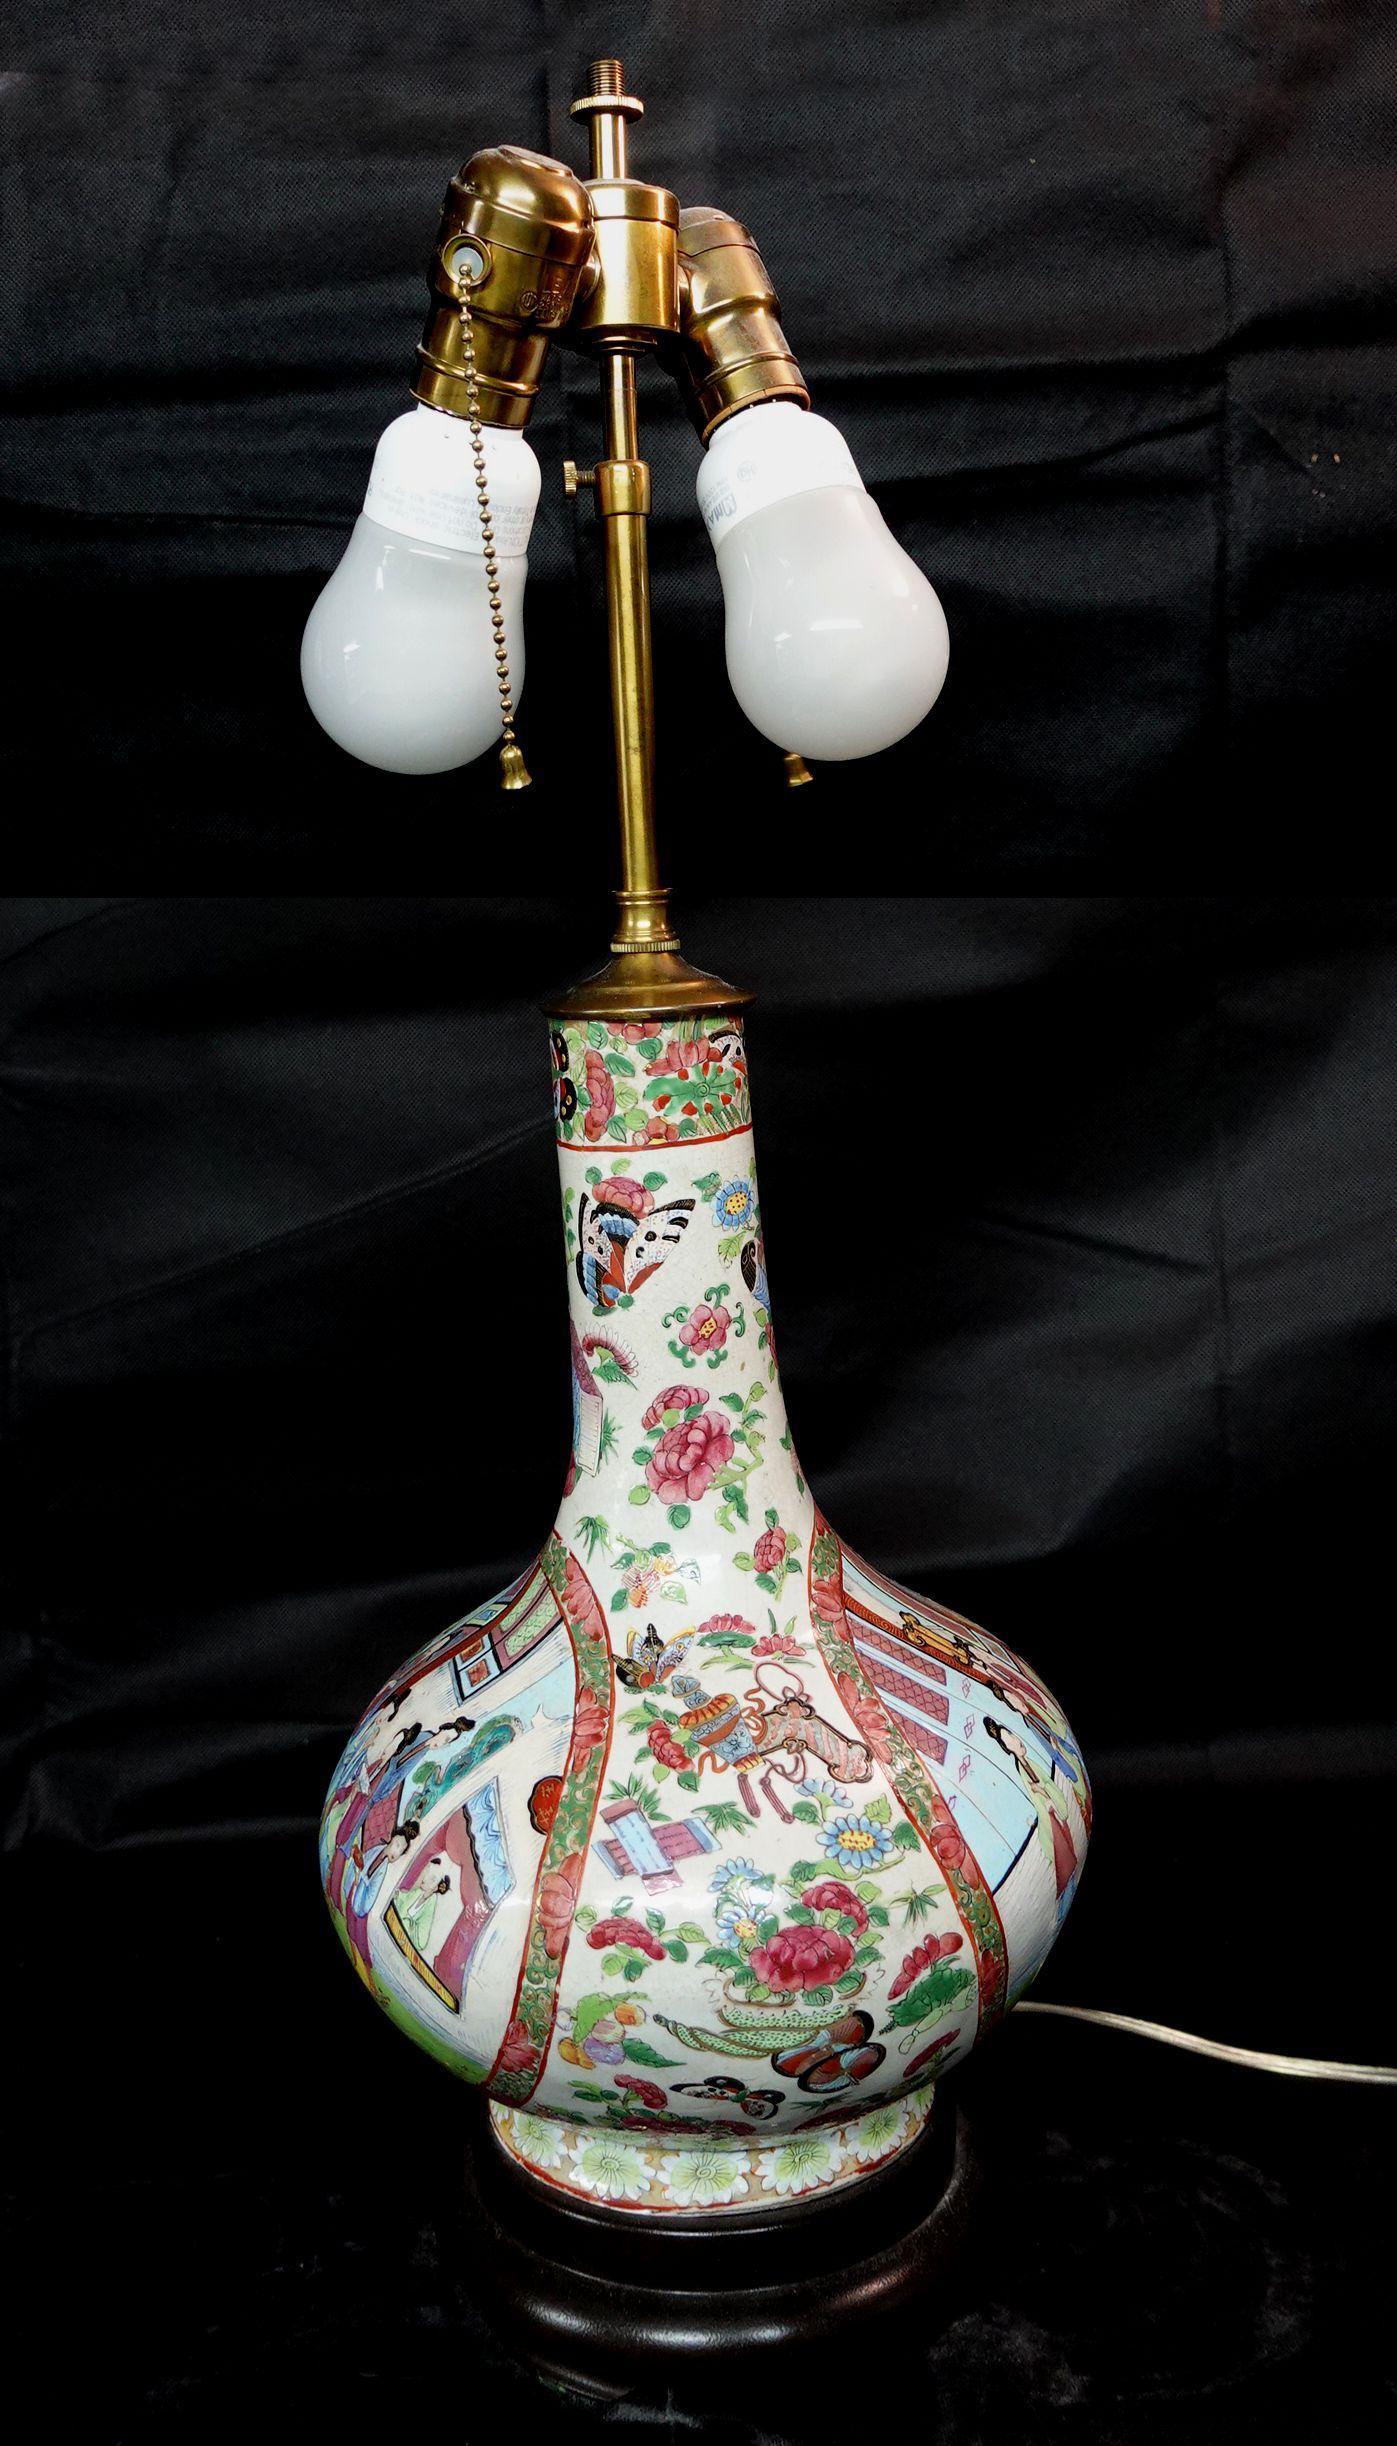 Famille Rose Export porcelain water bottle converted to a lamp, China, early 19th century, bottle ht. 13 in.
total ht. 24.5